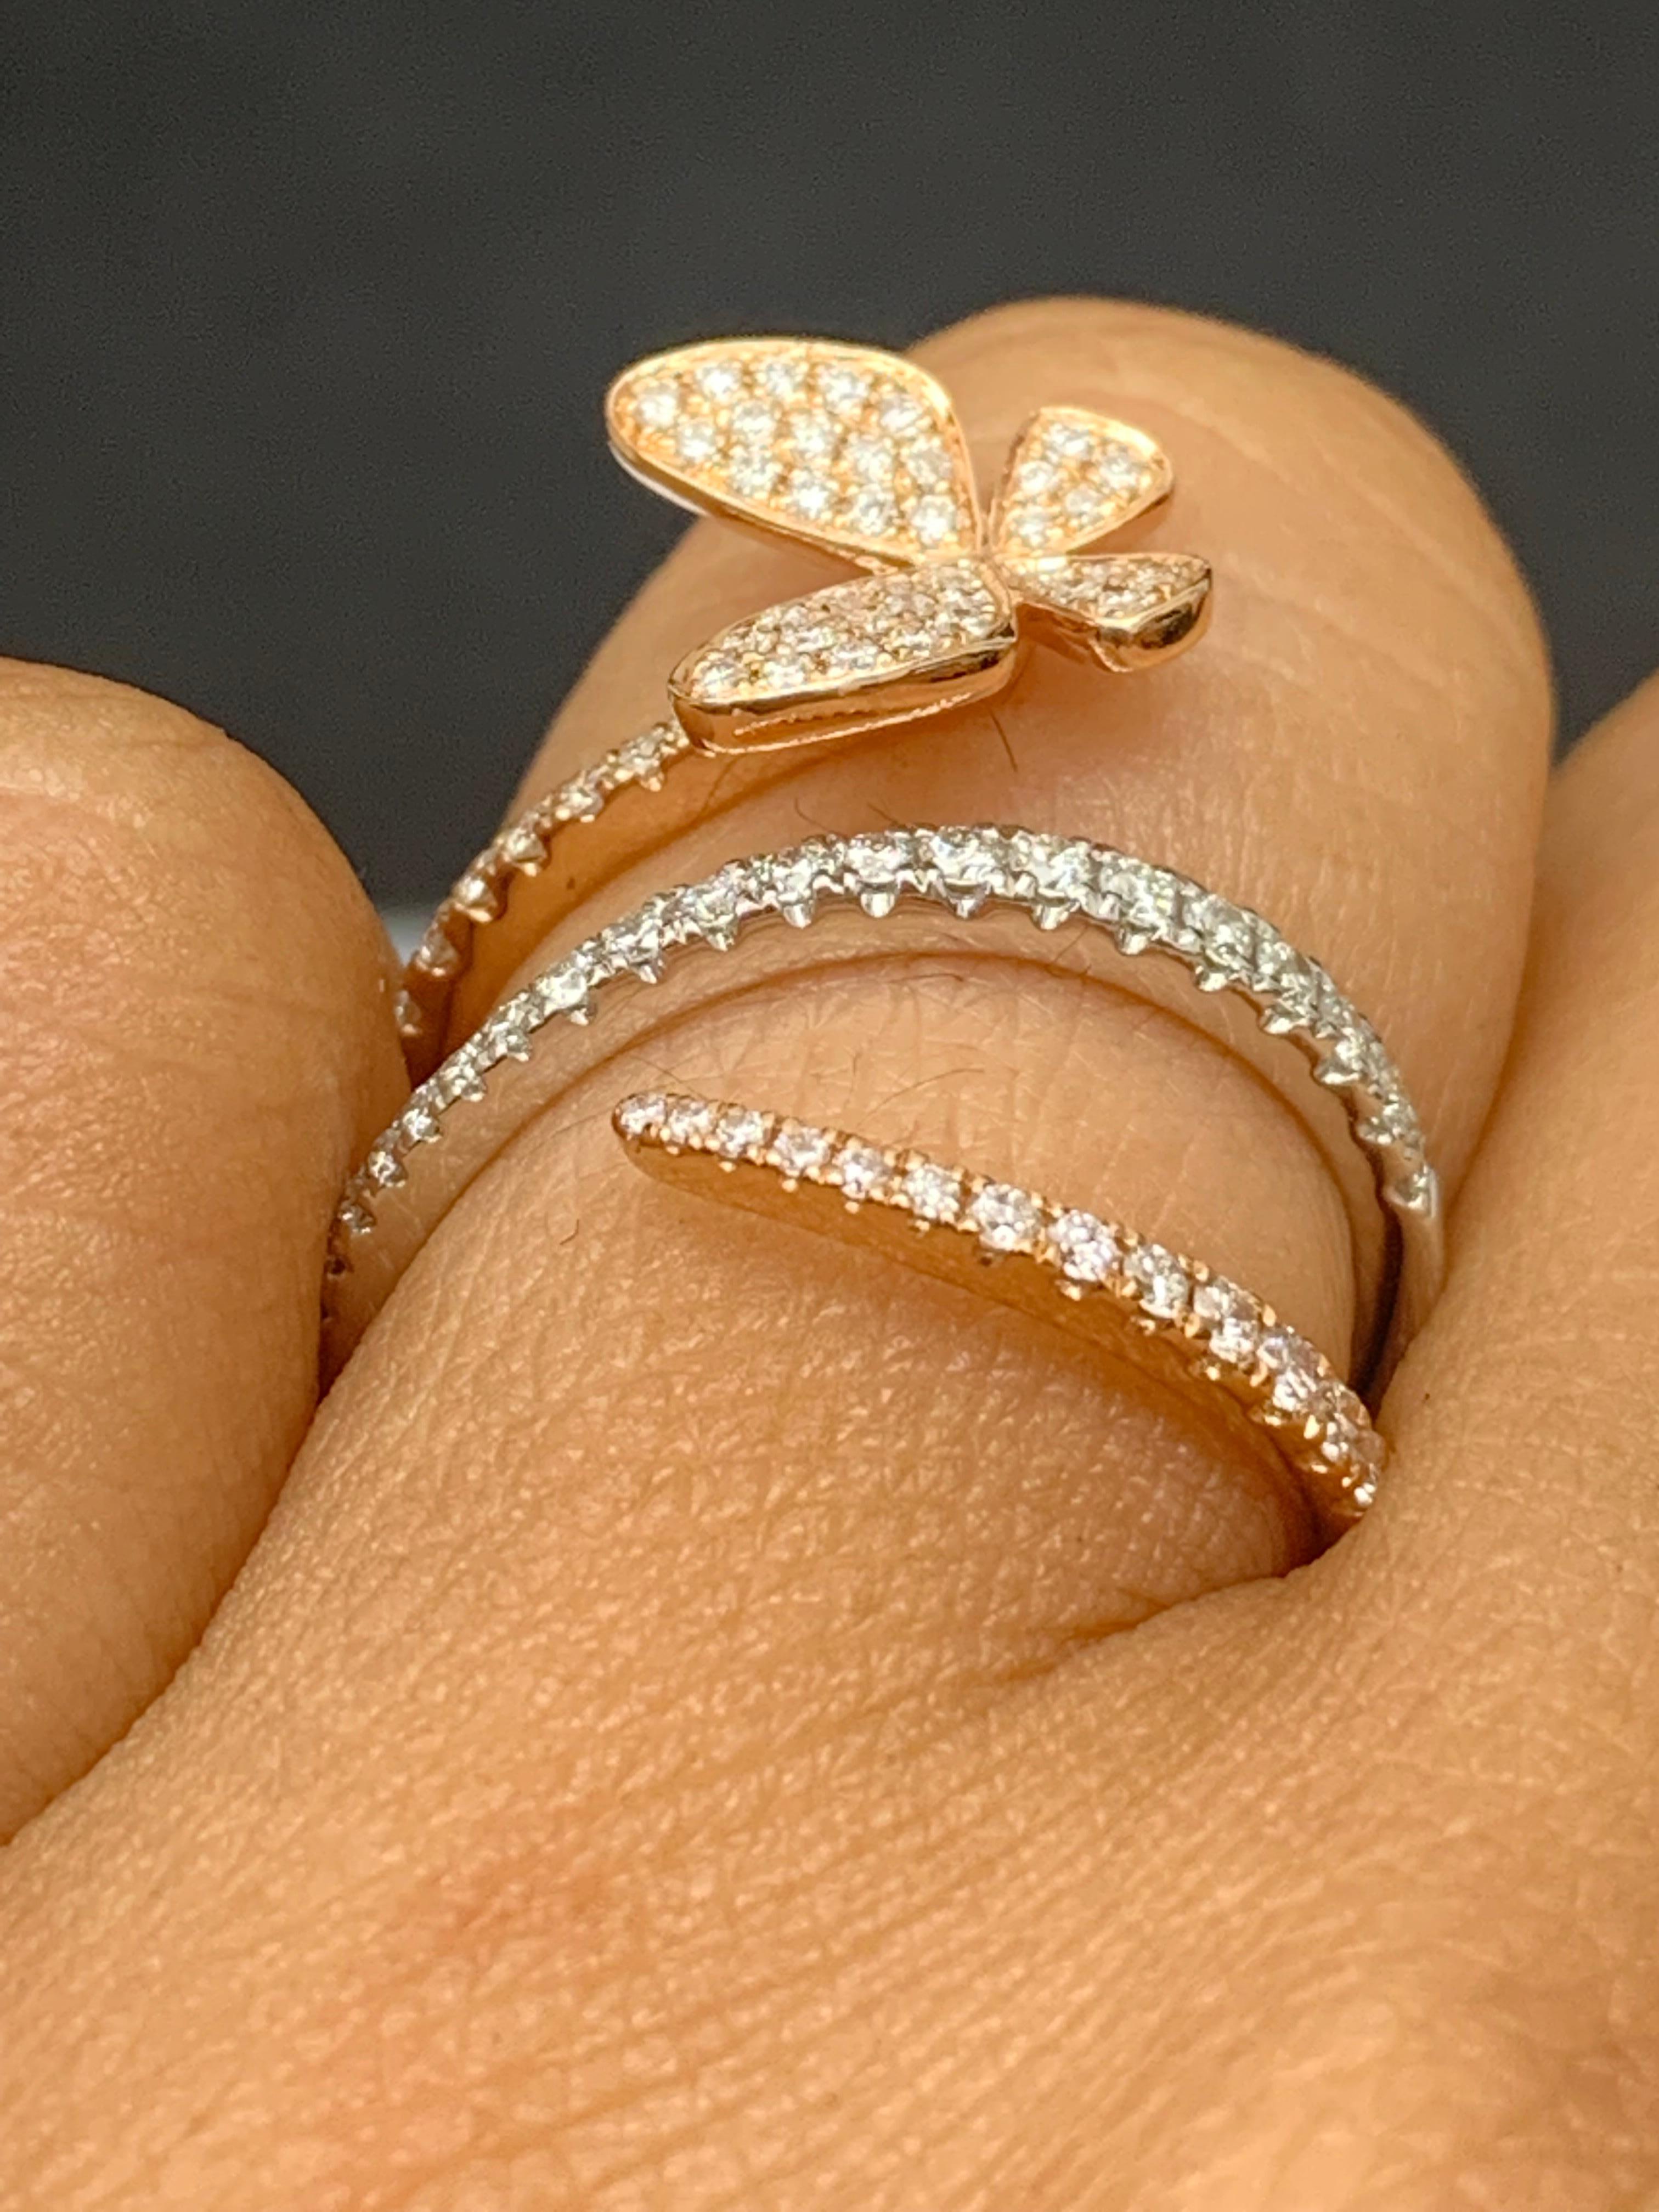 A fashionable piece of jewelry showcasing round brilliant diamonds set in a chic butterfly design. Made in 18k mixed gold. 83 accent Diamonds weigh 0.57 carats in total. 
Style available in different price ranges. Prices are based on your selection.